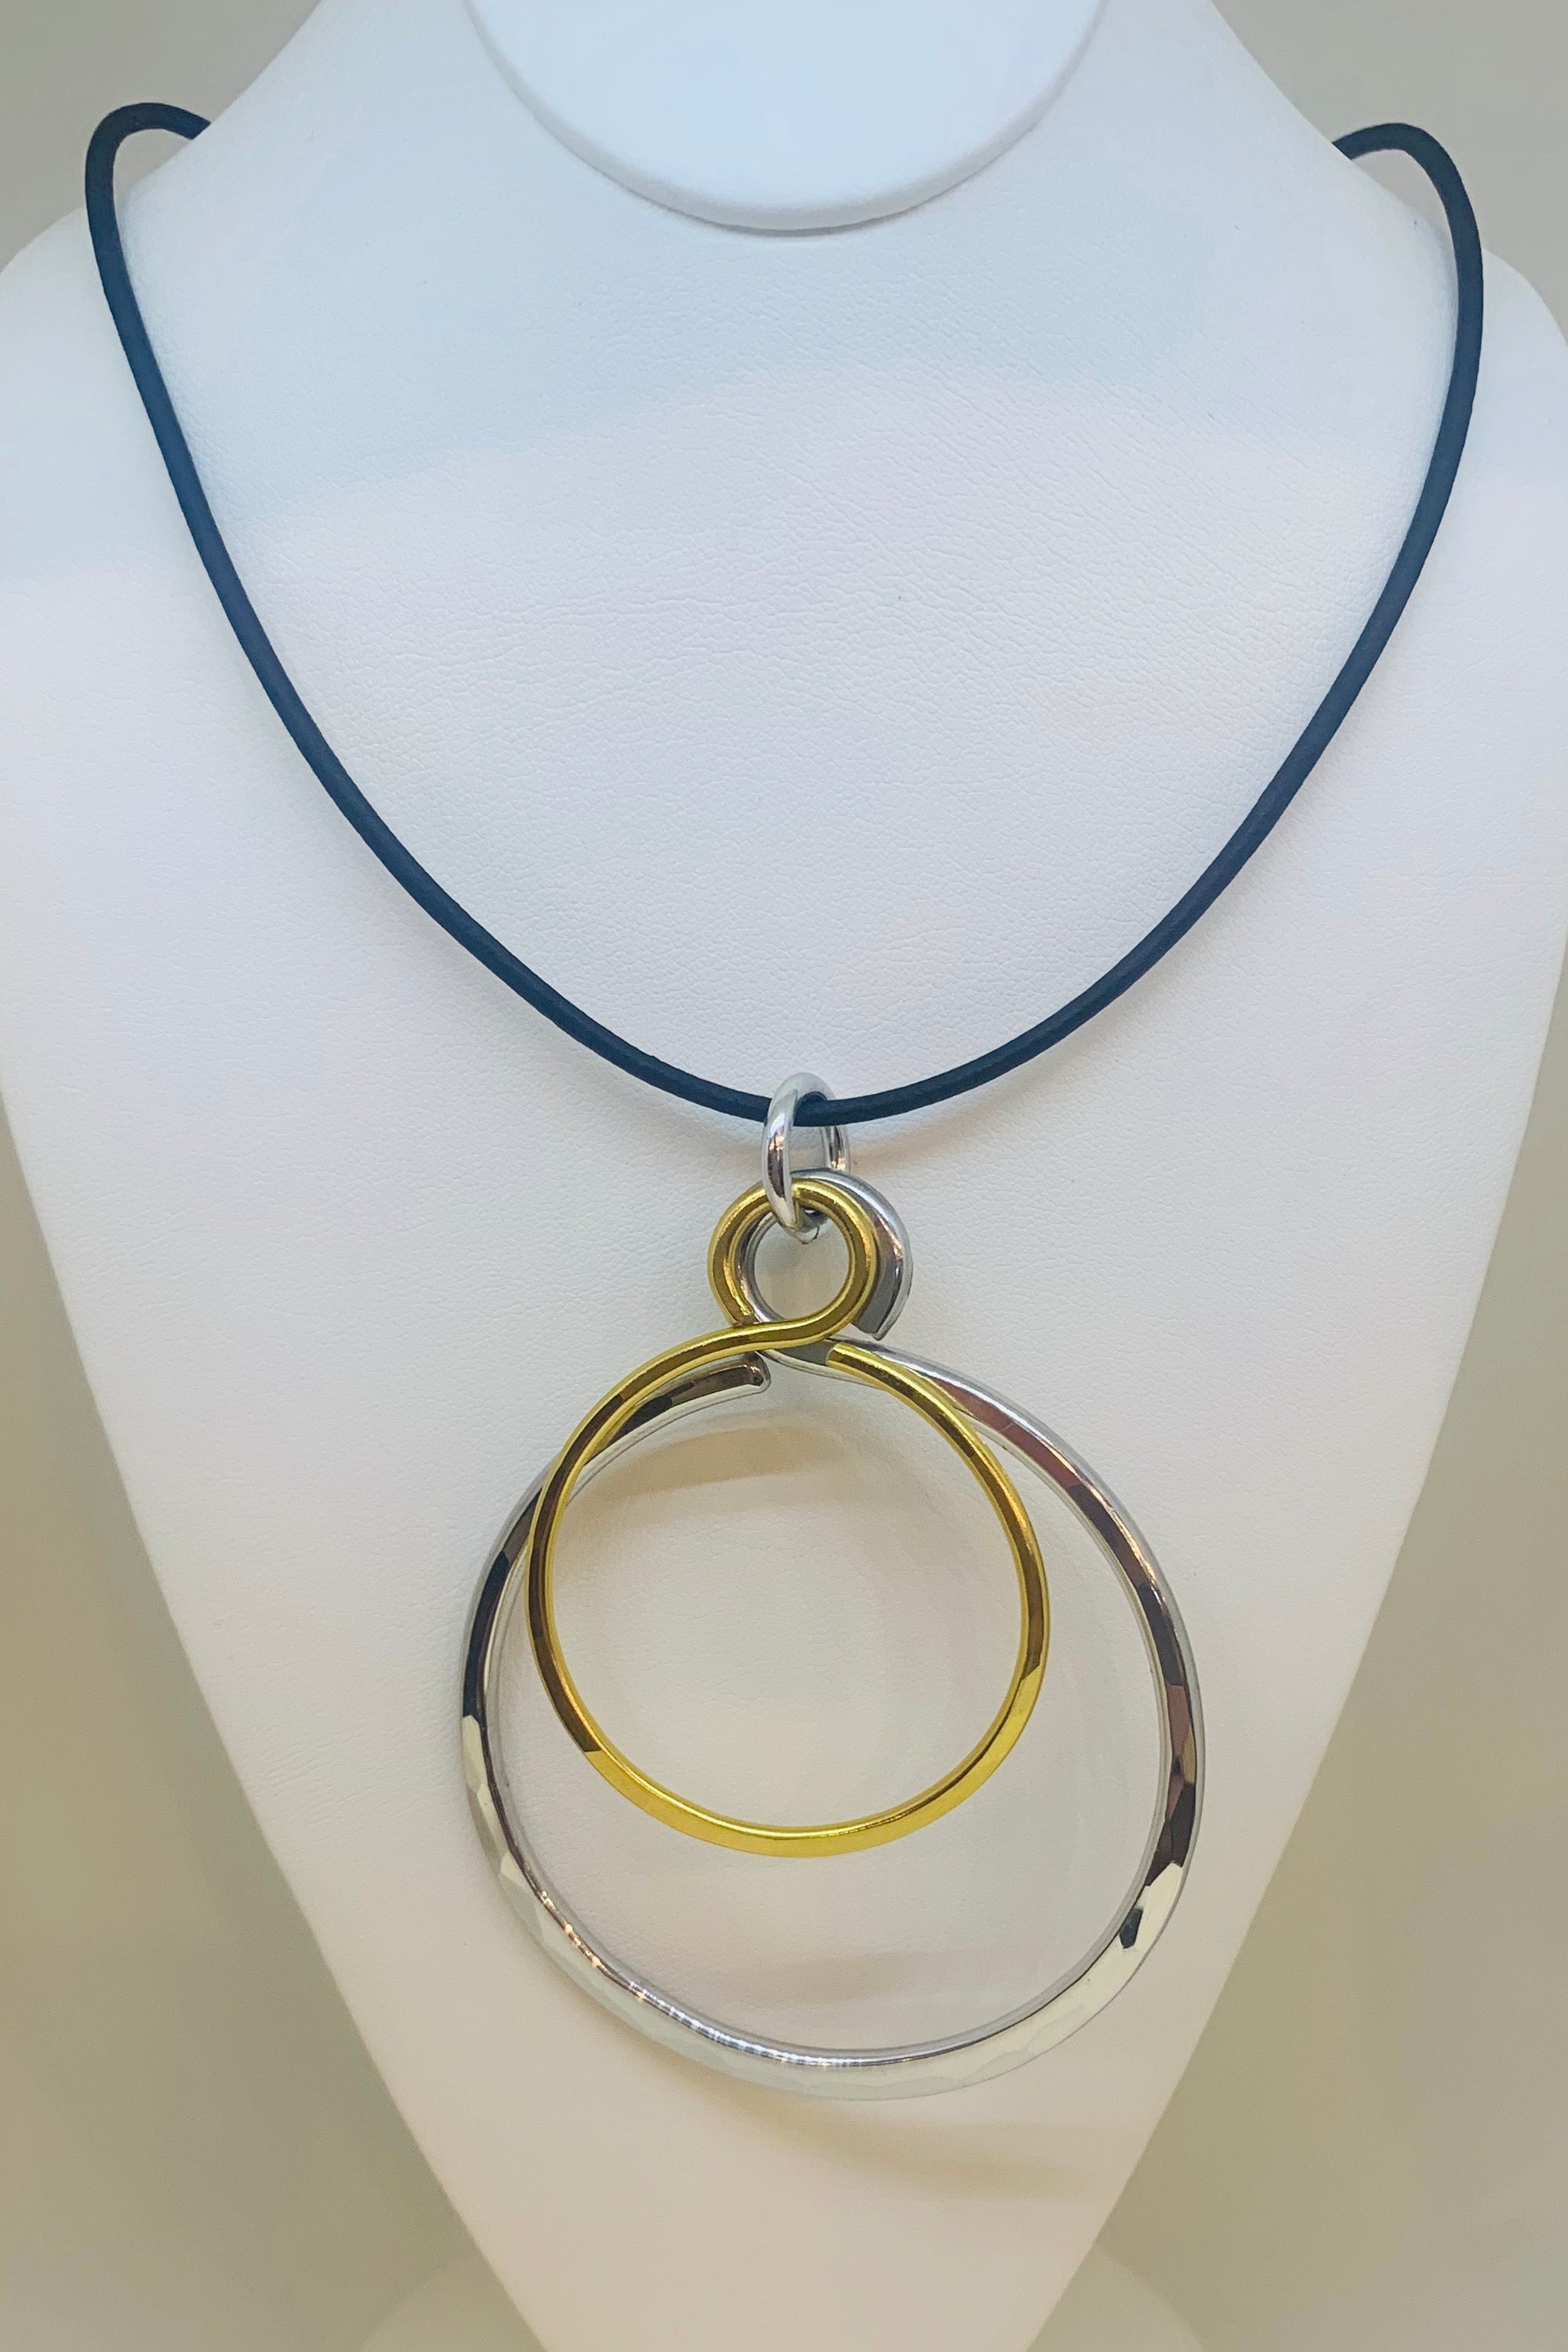 Two-Tone Circle Double Necklace w/ Black Leather Cord